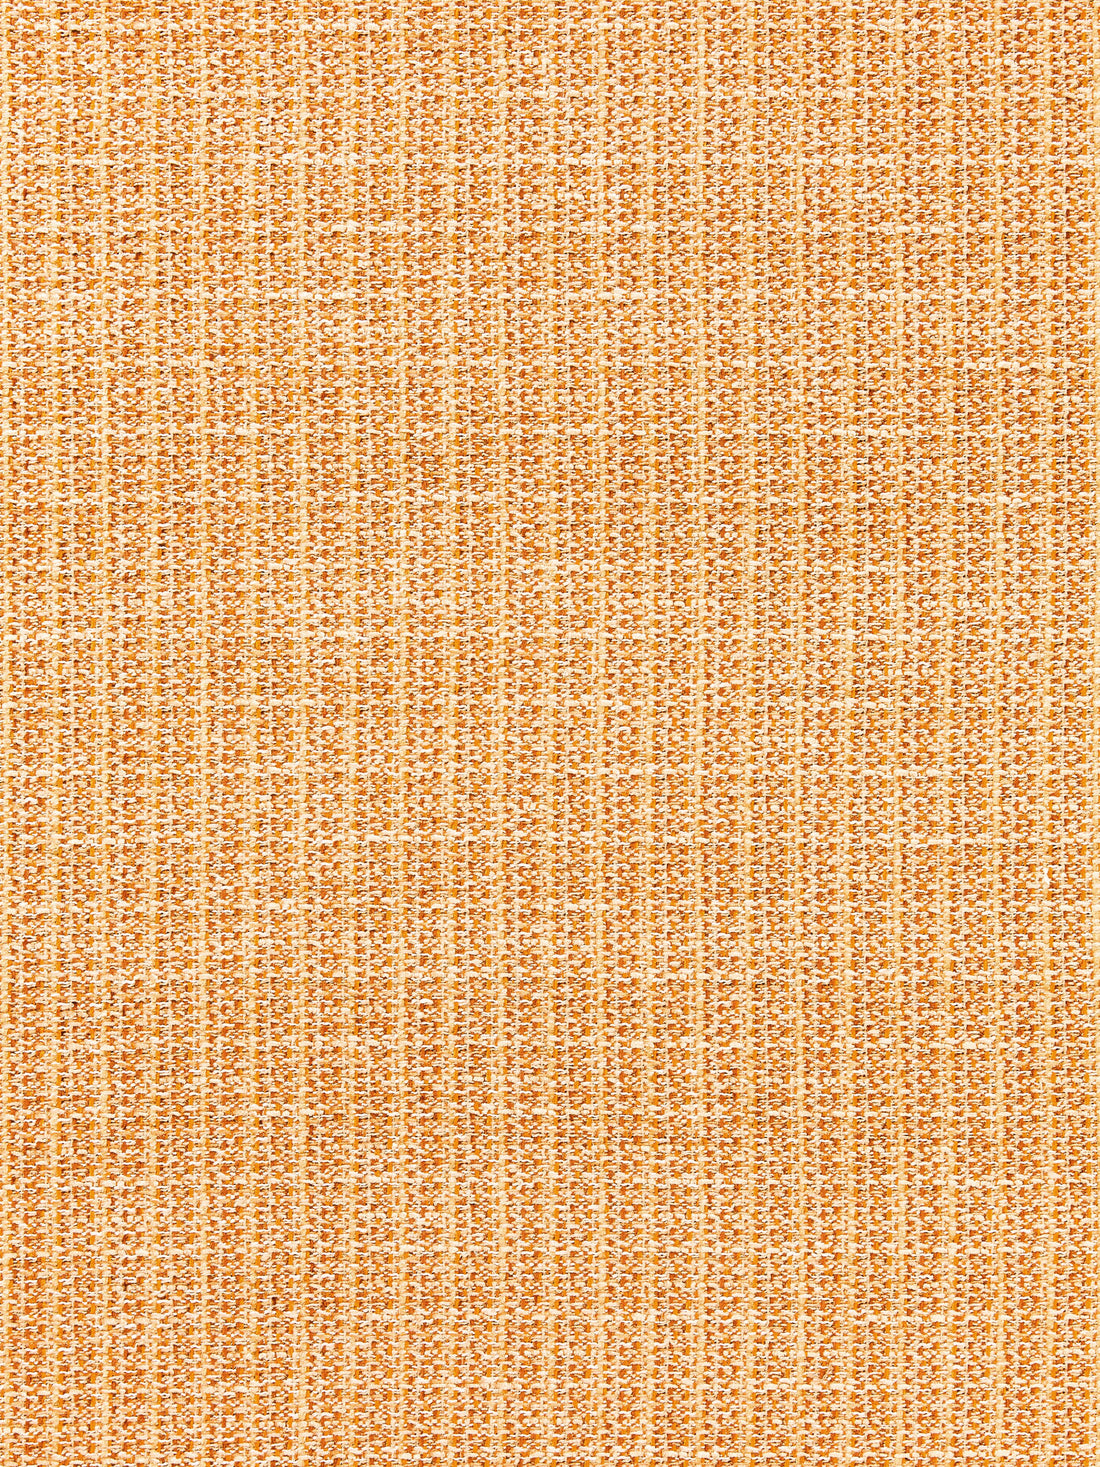 Highland Chenille fabric in sunset color - pattern number SC 000327257 - by Scalamandre in the Scalamandre Fabrics Book 1 collection